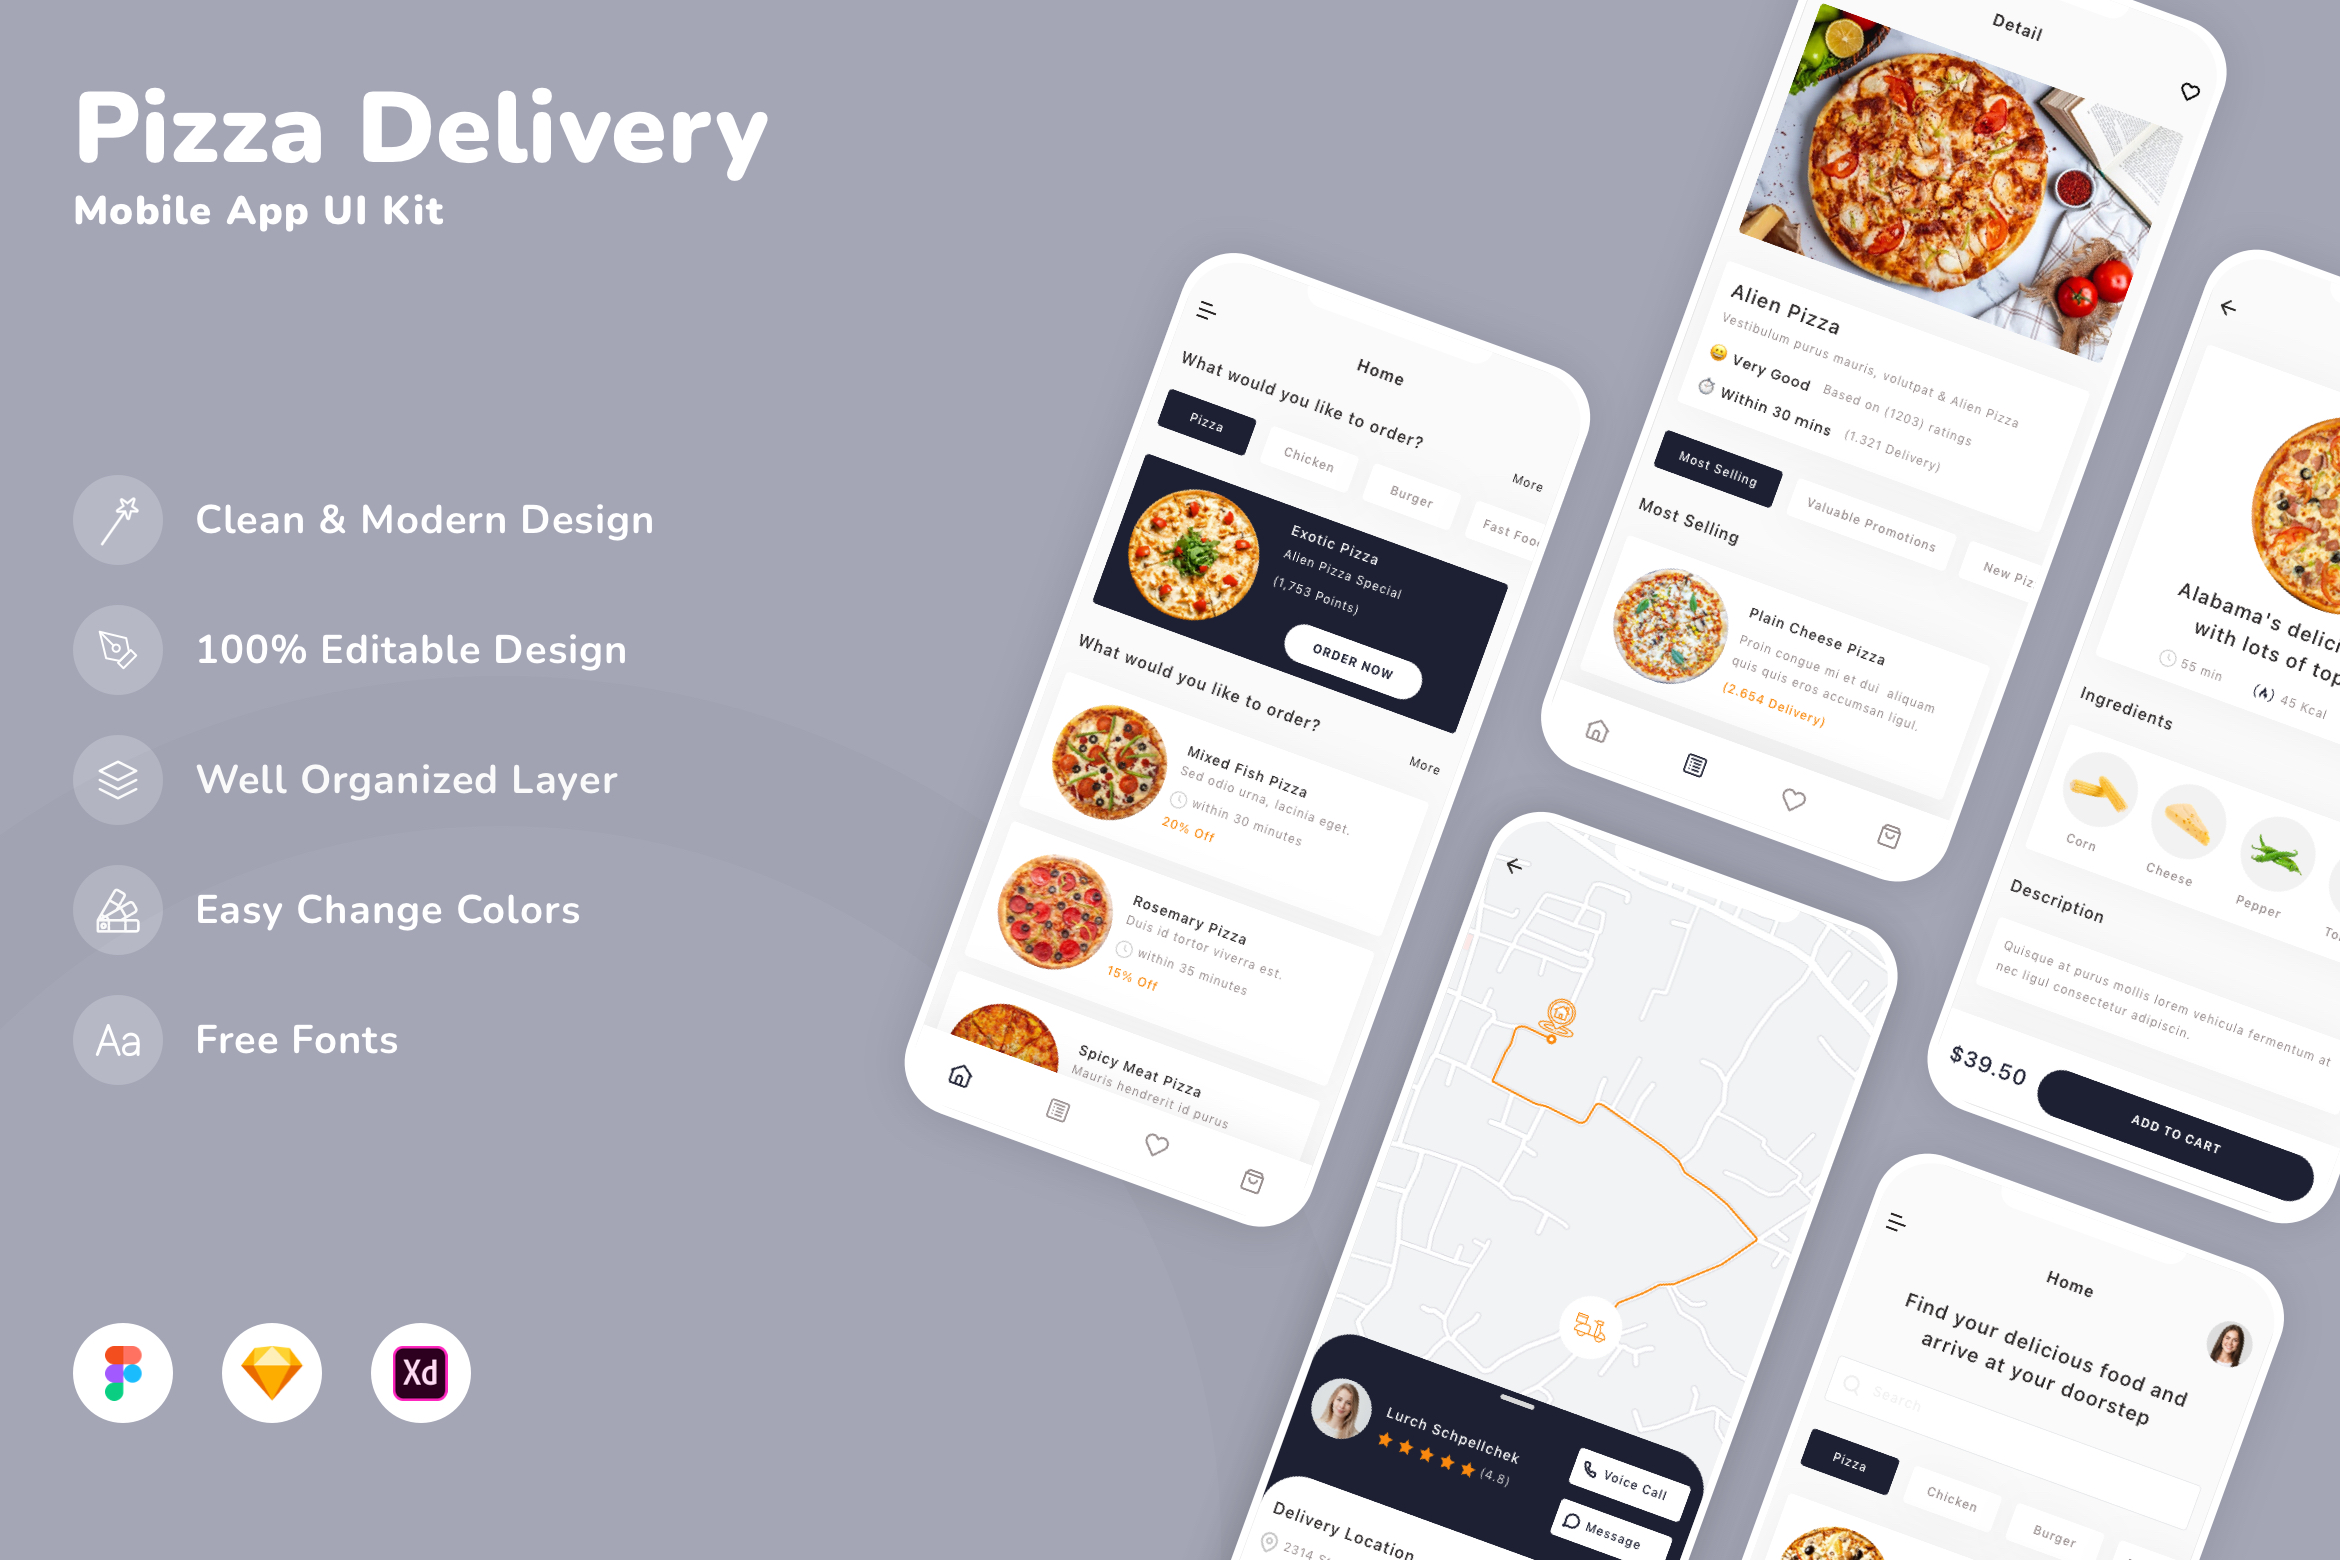 Pizza Delivery Mobile App UI Kit